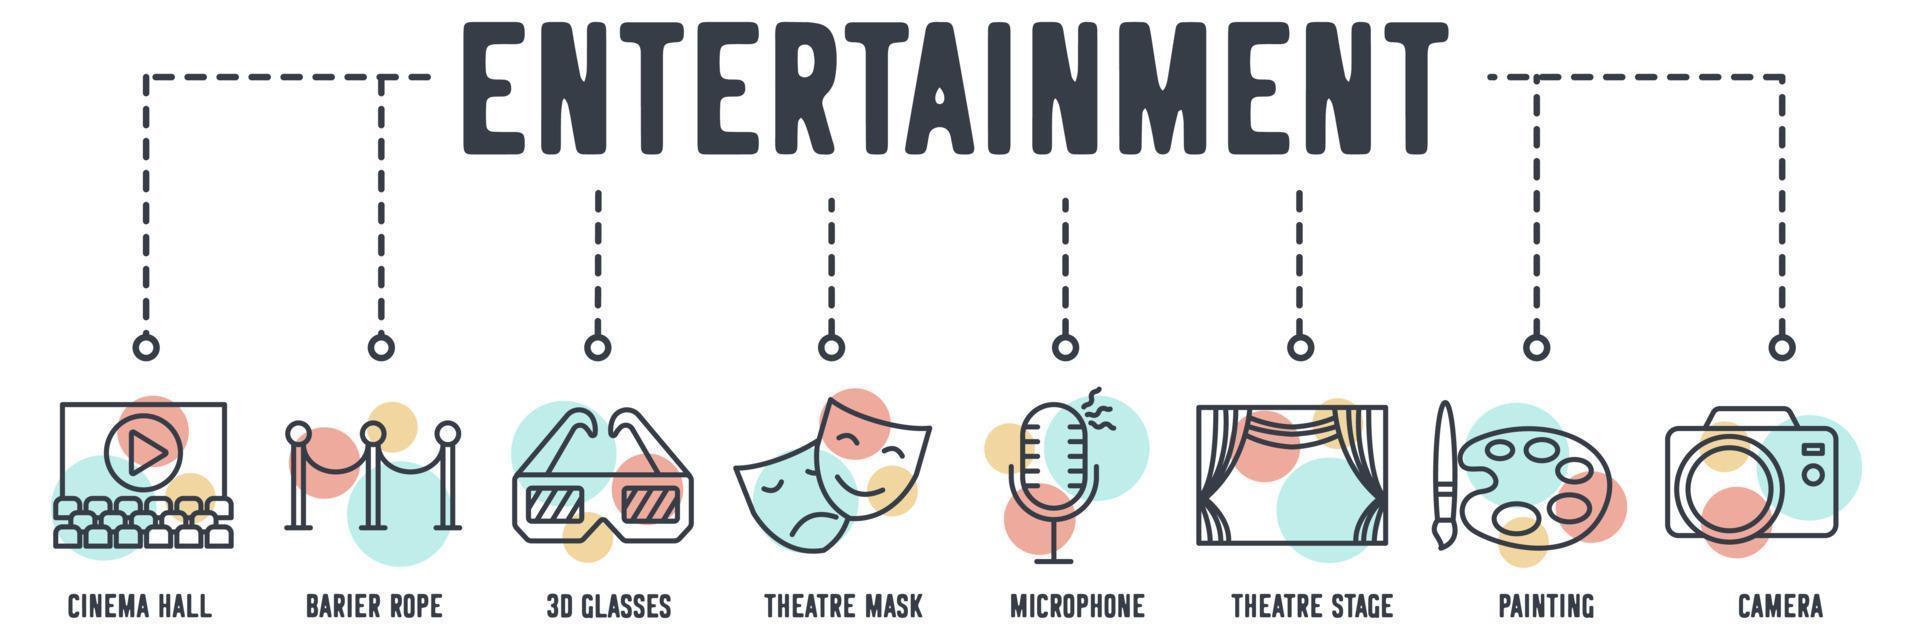 Cinema Entertainment banner web icon. cinema hall, barrier rope, 3d glasses, theatre mask, microphone, theatre stage, painting, camera vector illustration concept.